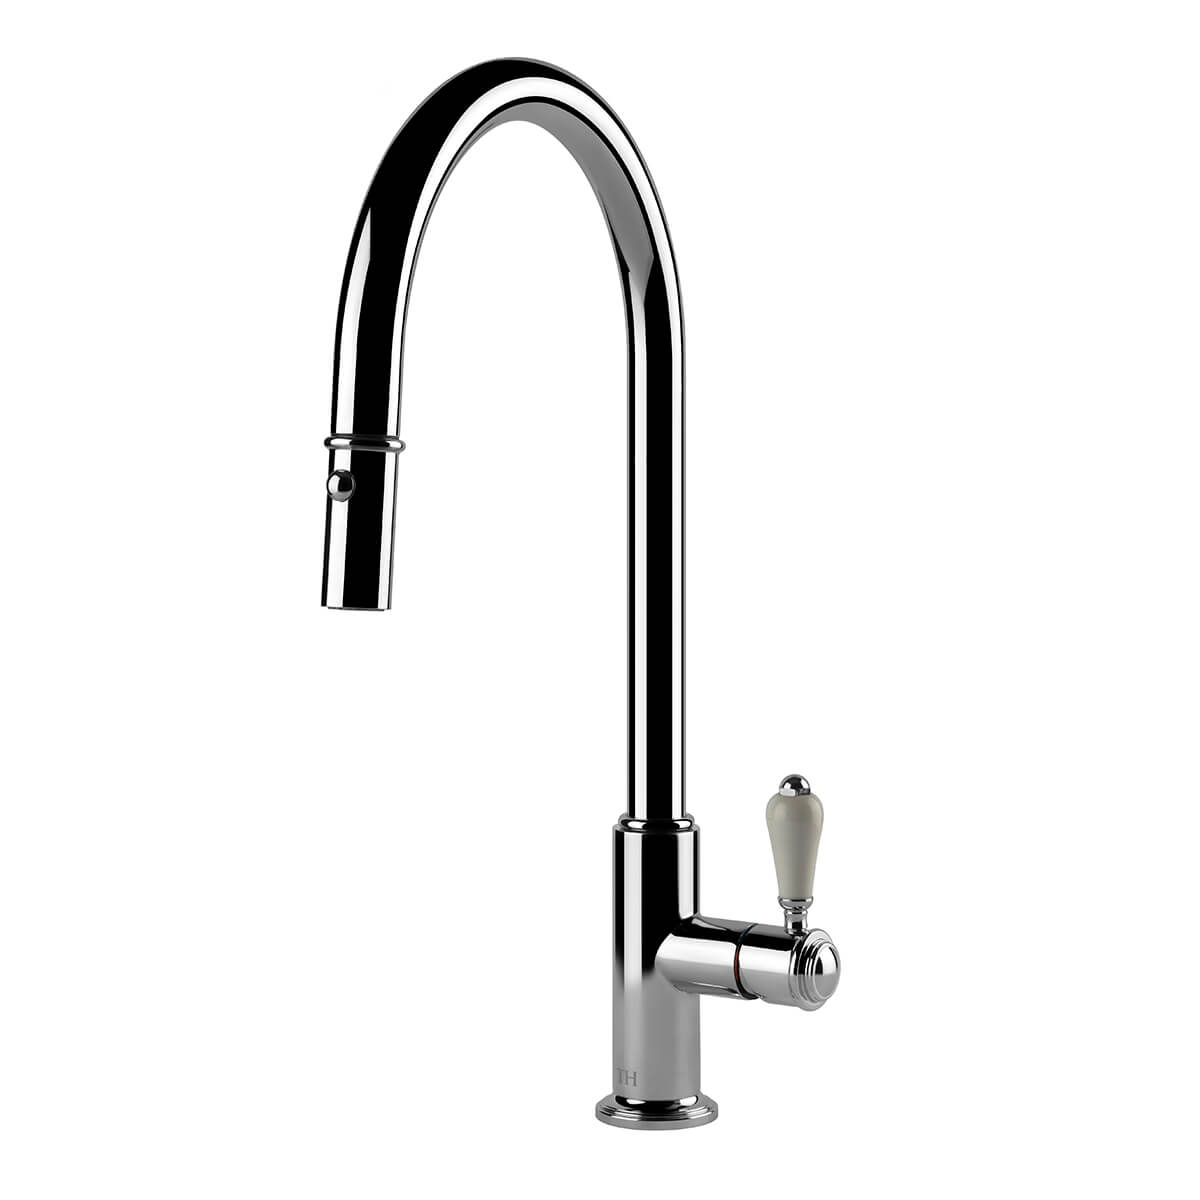 TURNER HASTINGS LUDLOW PULL OUT SINK MIXER 418MM CHROME (CERAMIC HANDLE)